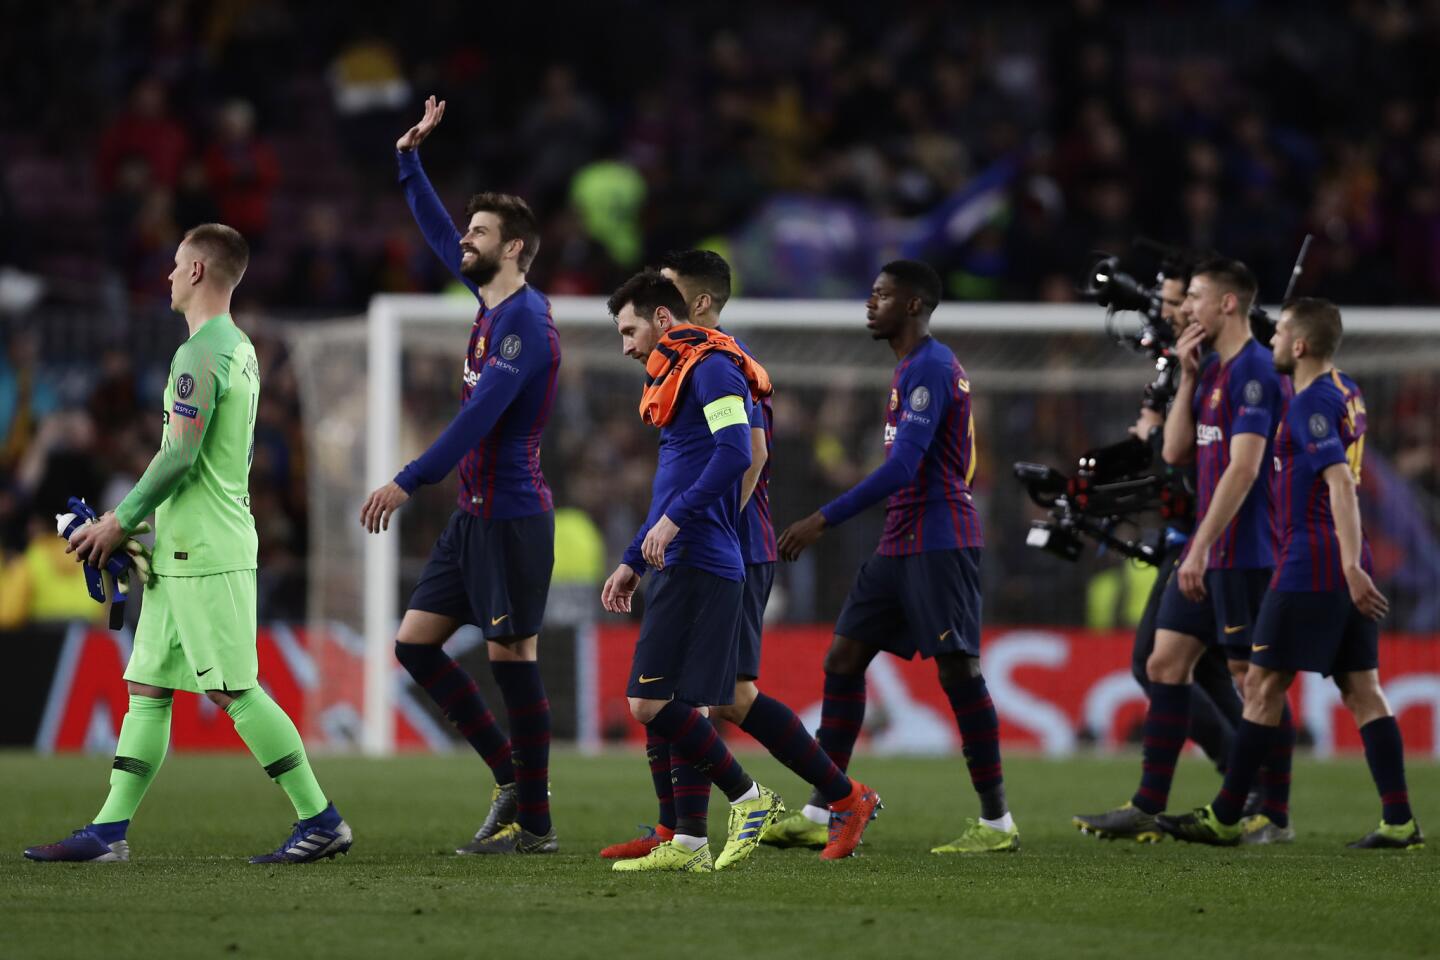 Barcelona defender Gerard Pique, second left, applauds fans at the end of the Champions League round of 16, 2nd leg, soccer match between FC Barcelona and Olympique Lyon at the Camp Nou stadium in Barcelona, Spain, Wednesday, March 13, 2019. (AP Photo/Manu Fernandez)